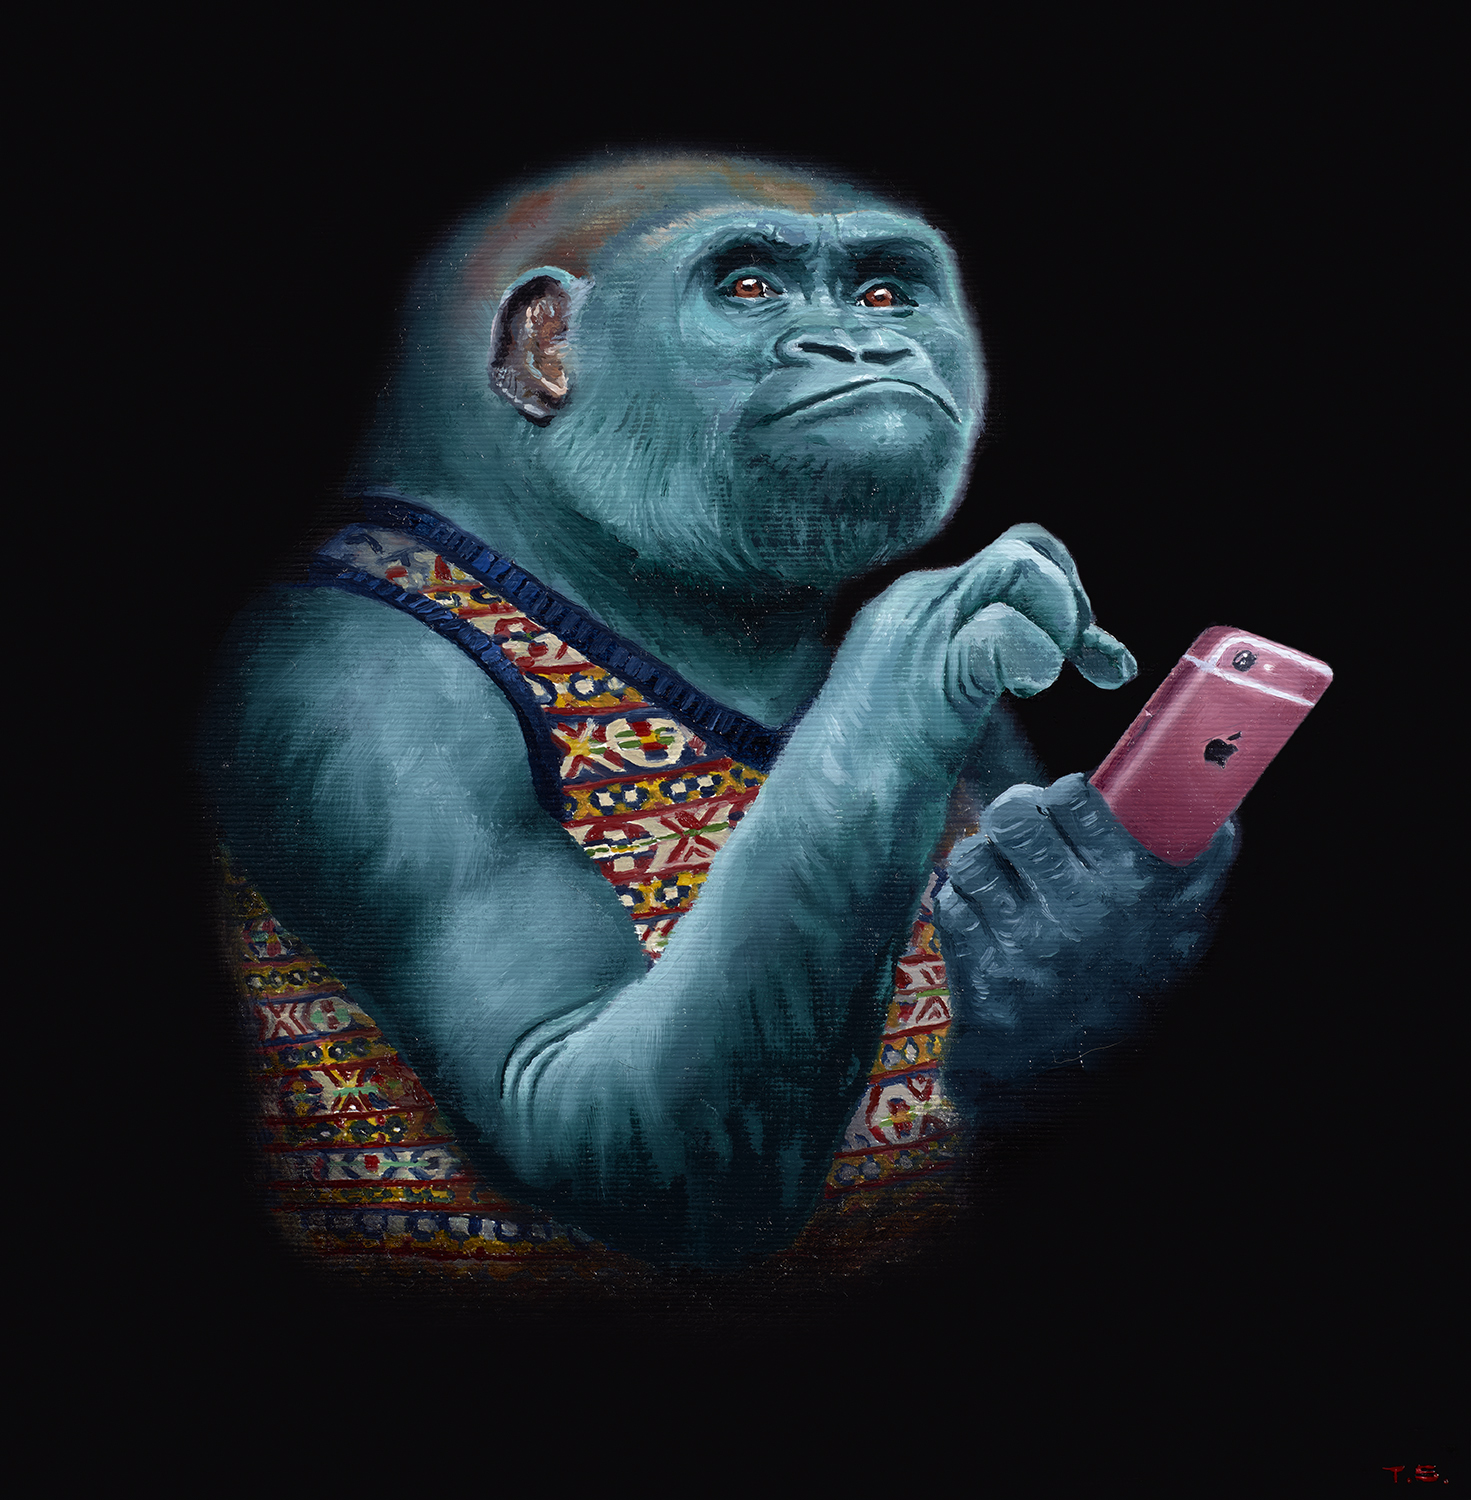 A gorilla making a tweet on his cell phone - Tony South - His Greatest Tweet